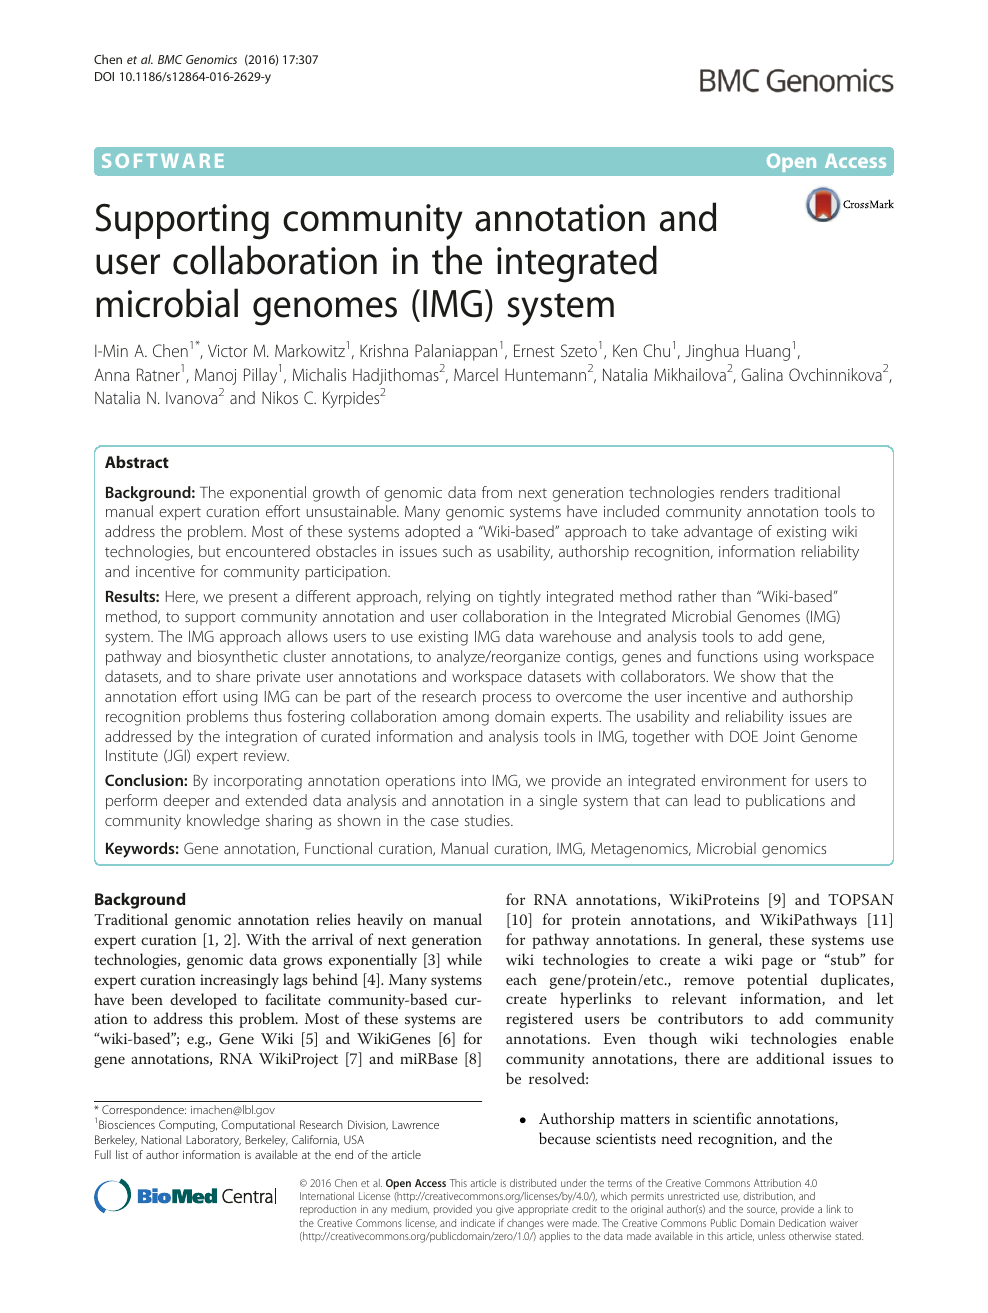 Supporting Community Annotation And User Collaboration In The Images, Photos, Reviews